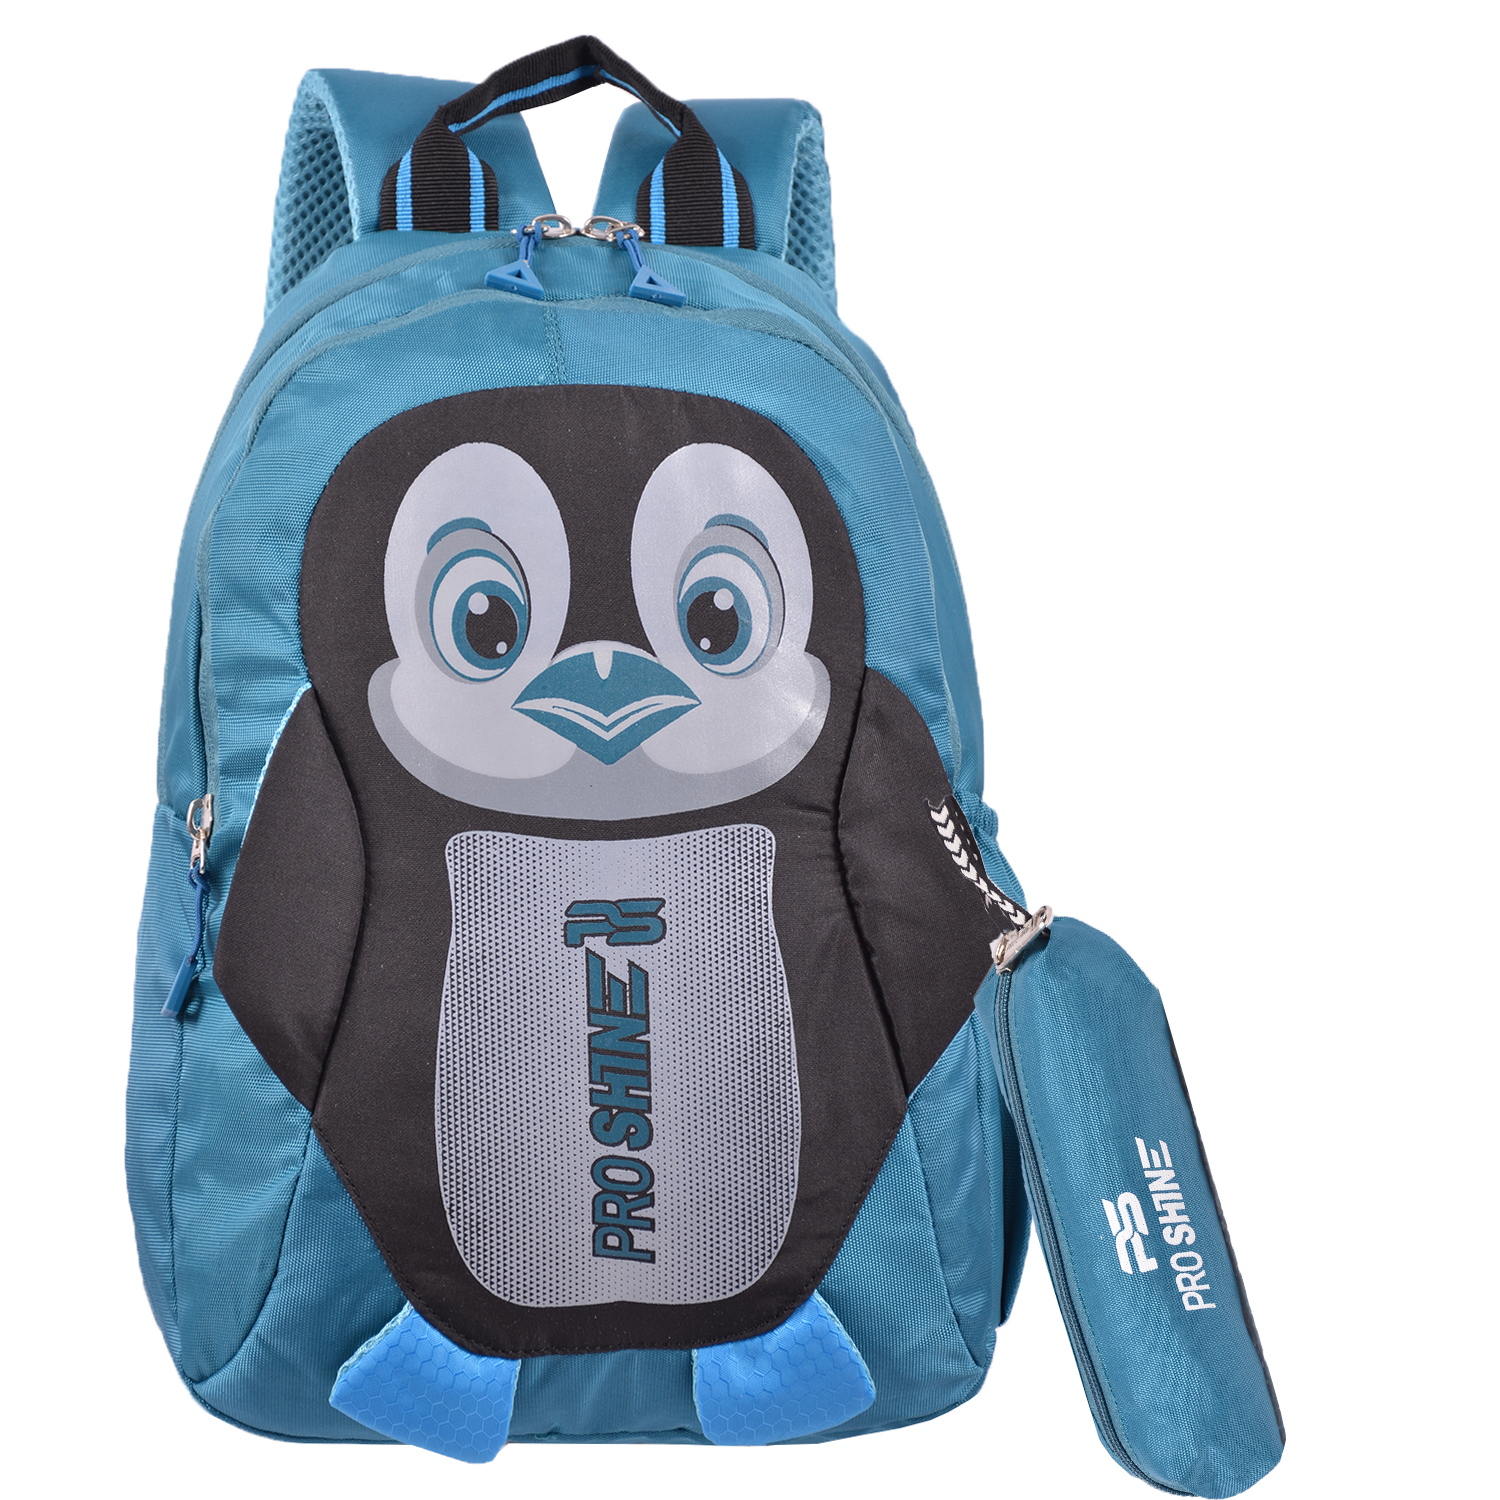 RoshanBags_PROSHINE 14L KIDS SCHOOL BAG FOR KG WITH POUCH A0239 TEAL